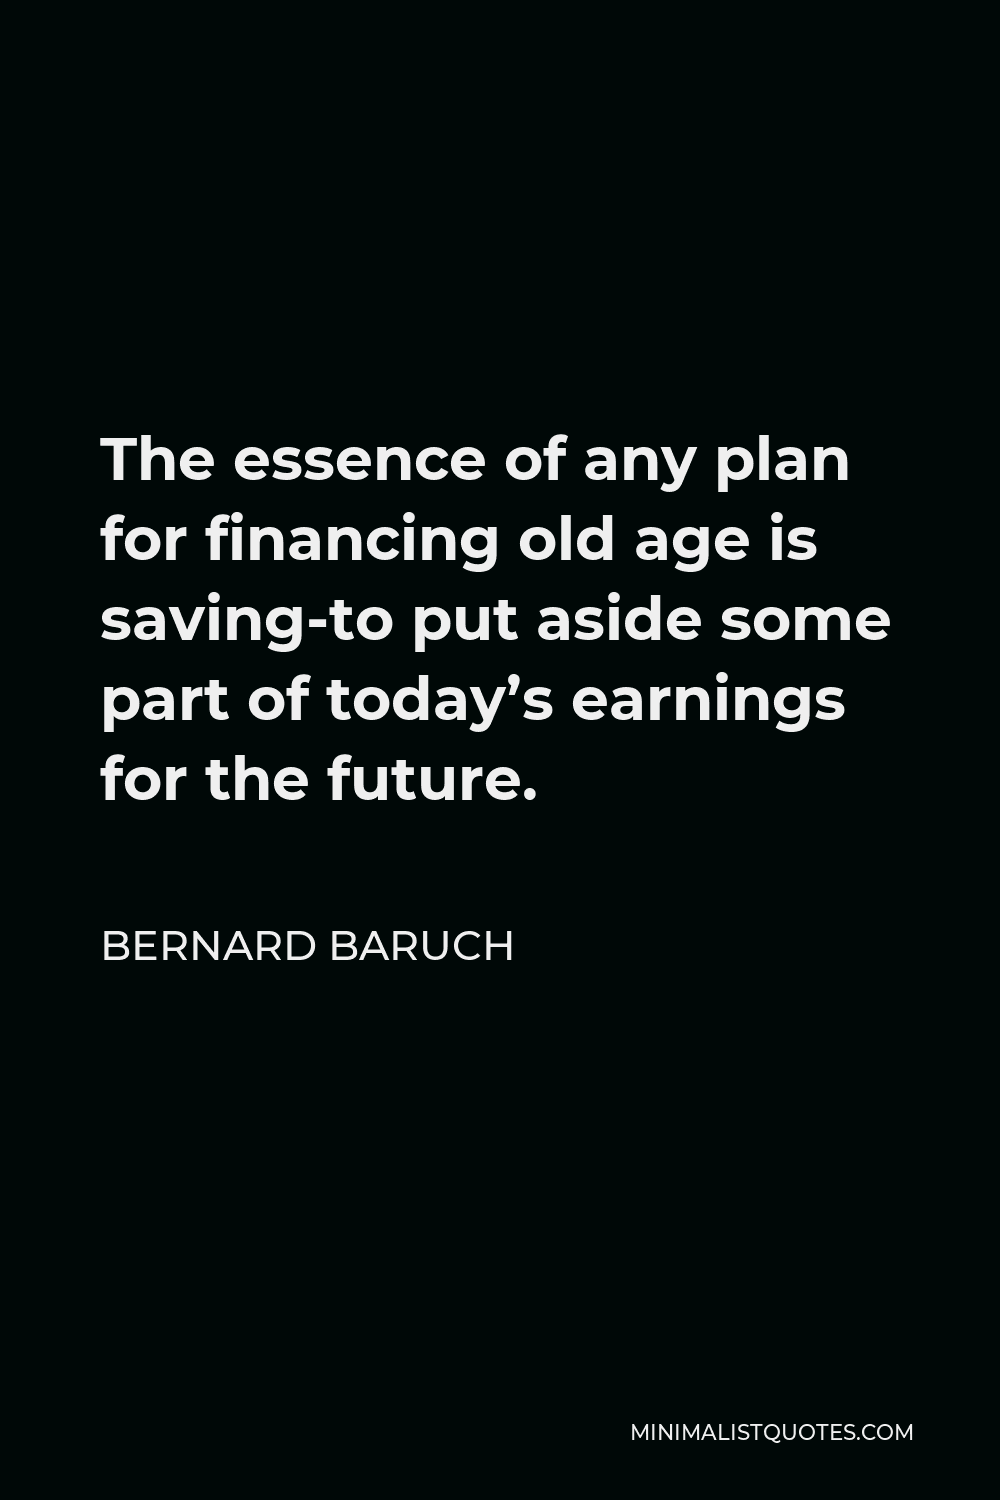 Bernard Baruch Quote - The essence of any plan for financing old age is saving-to put aside some part of today’s earnings for the future.